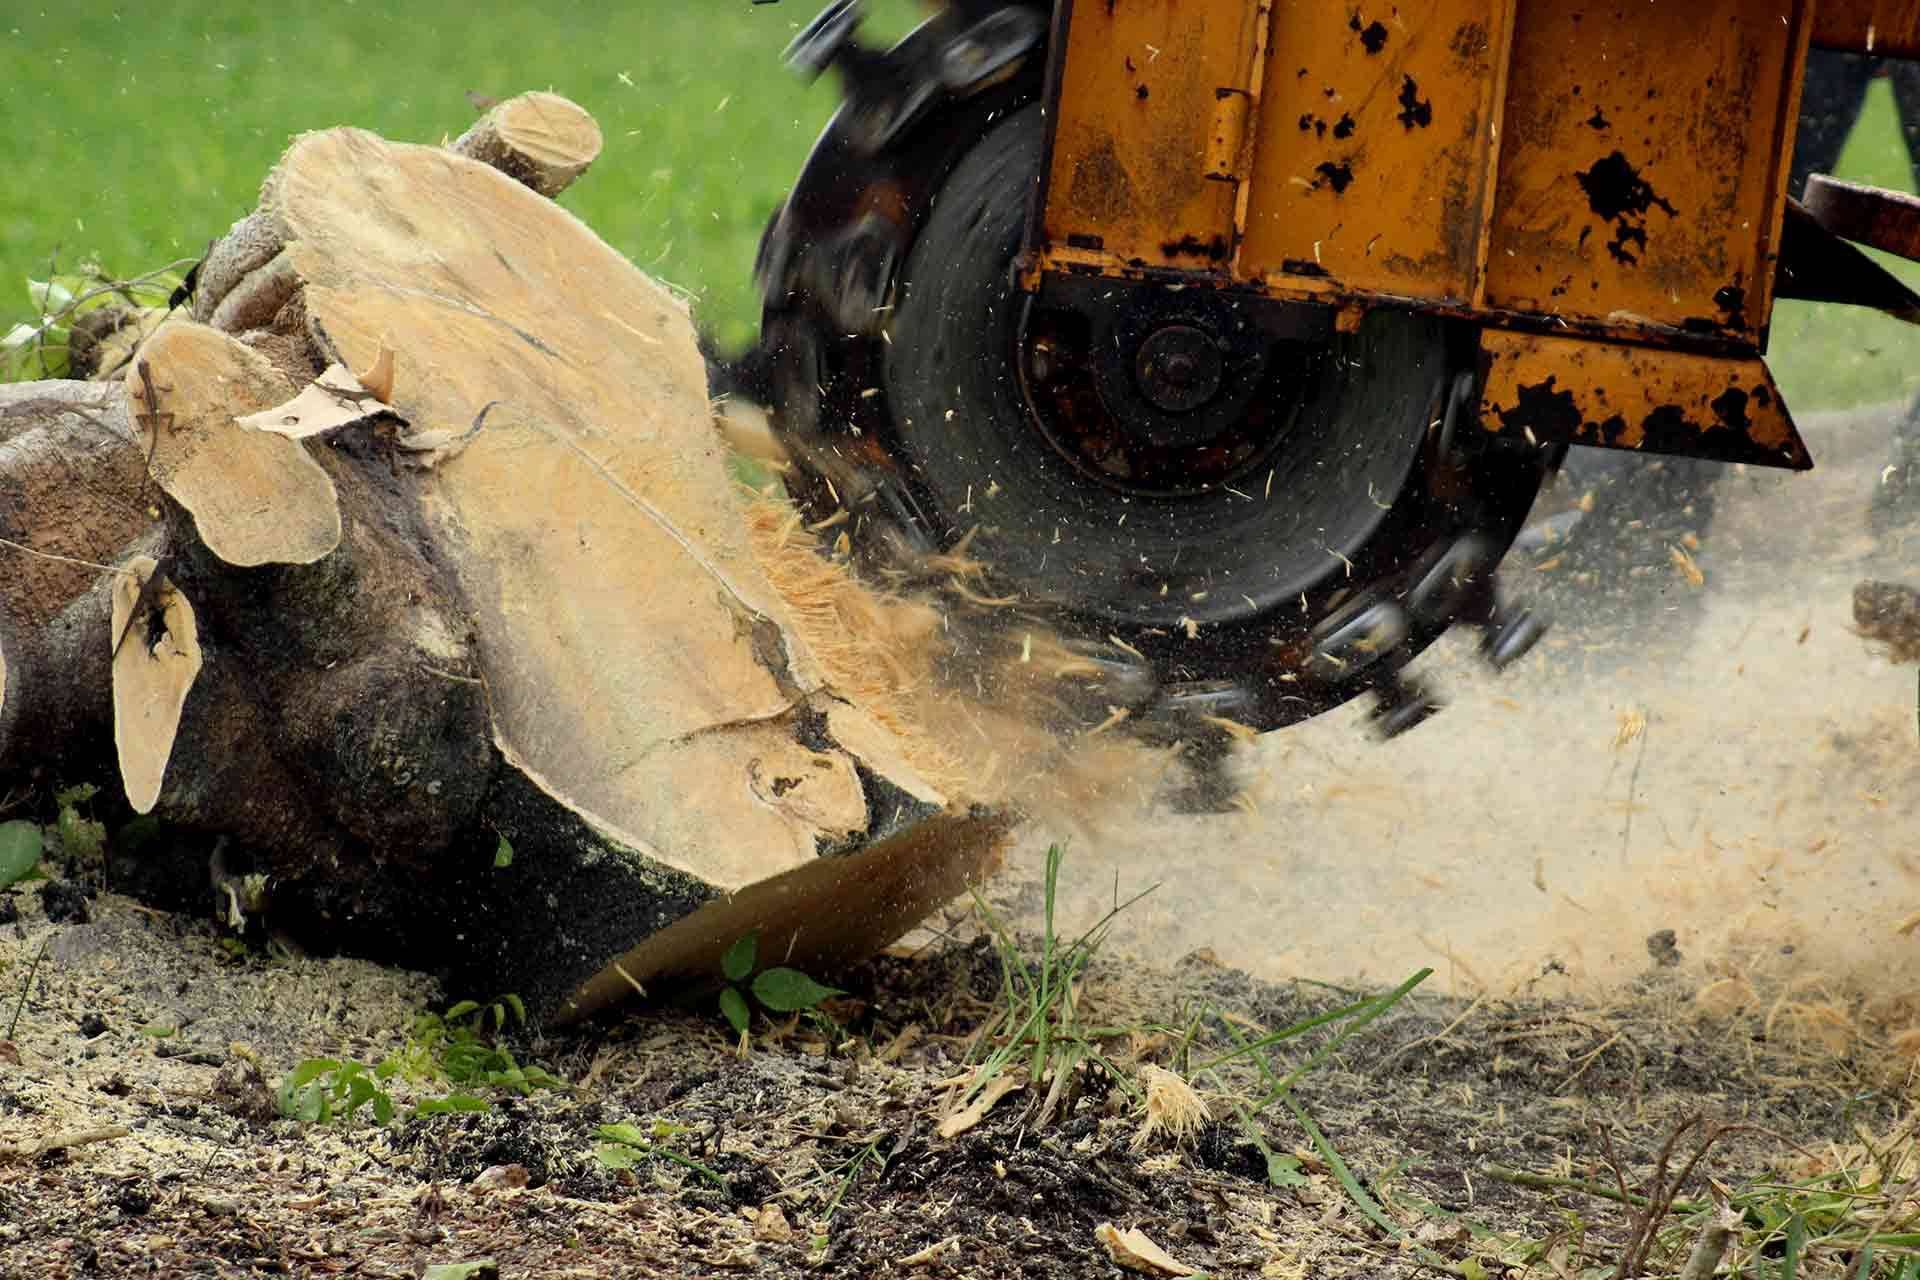 https://storage.tally.so/d1b0c787-39e5-4369-9073-cce551845841/Stump-Removal-How-to.jpg